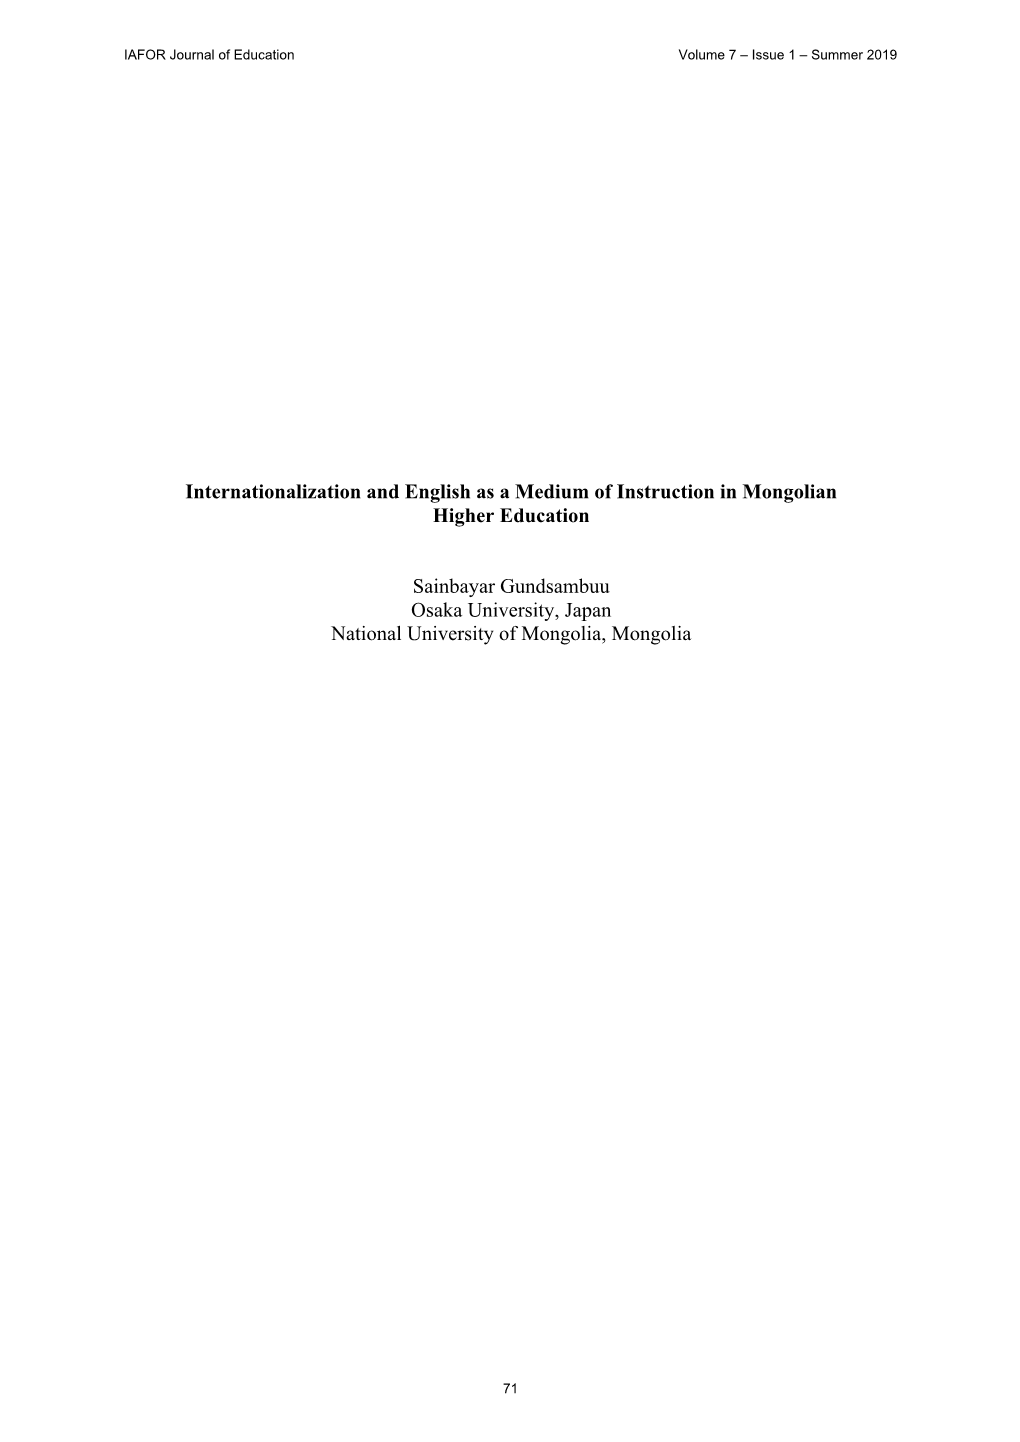 Internationalization and English As a Medium of Instruction in Mongolian Higher Education